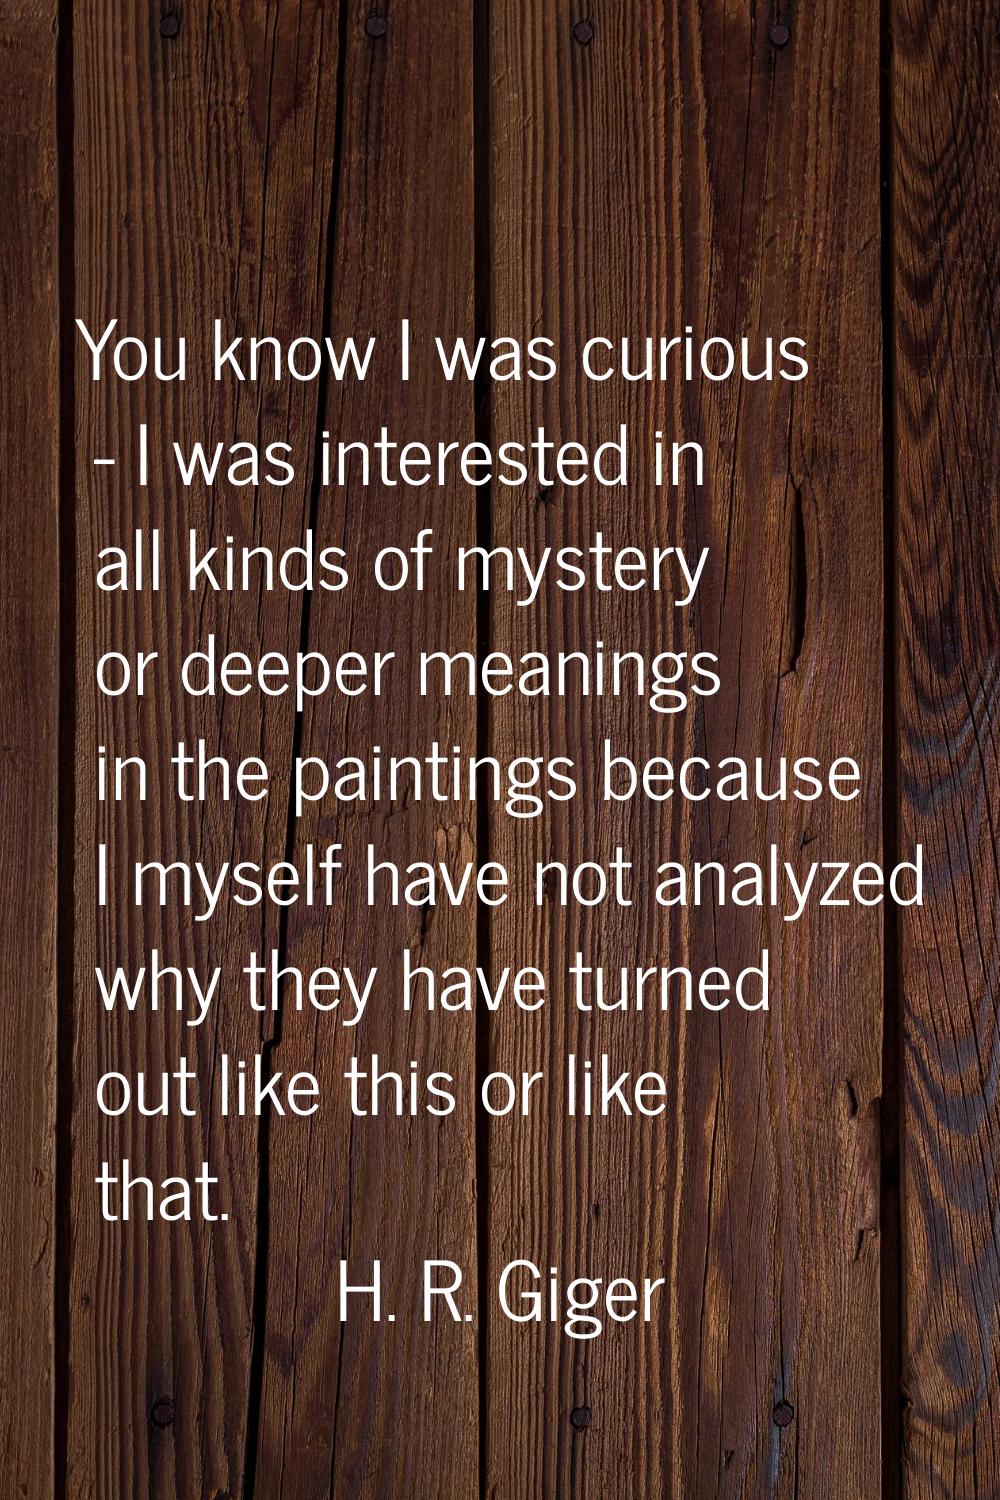 You know I was curious - I was interested in all kinds of mystery or deeper meanings in the paintin